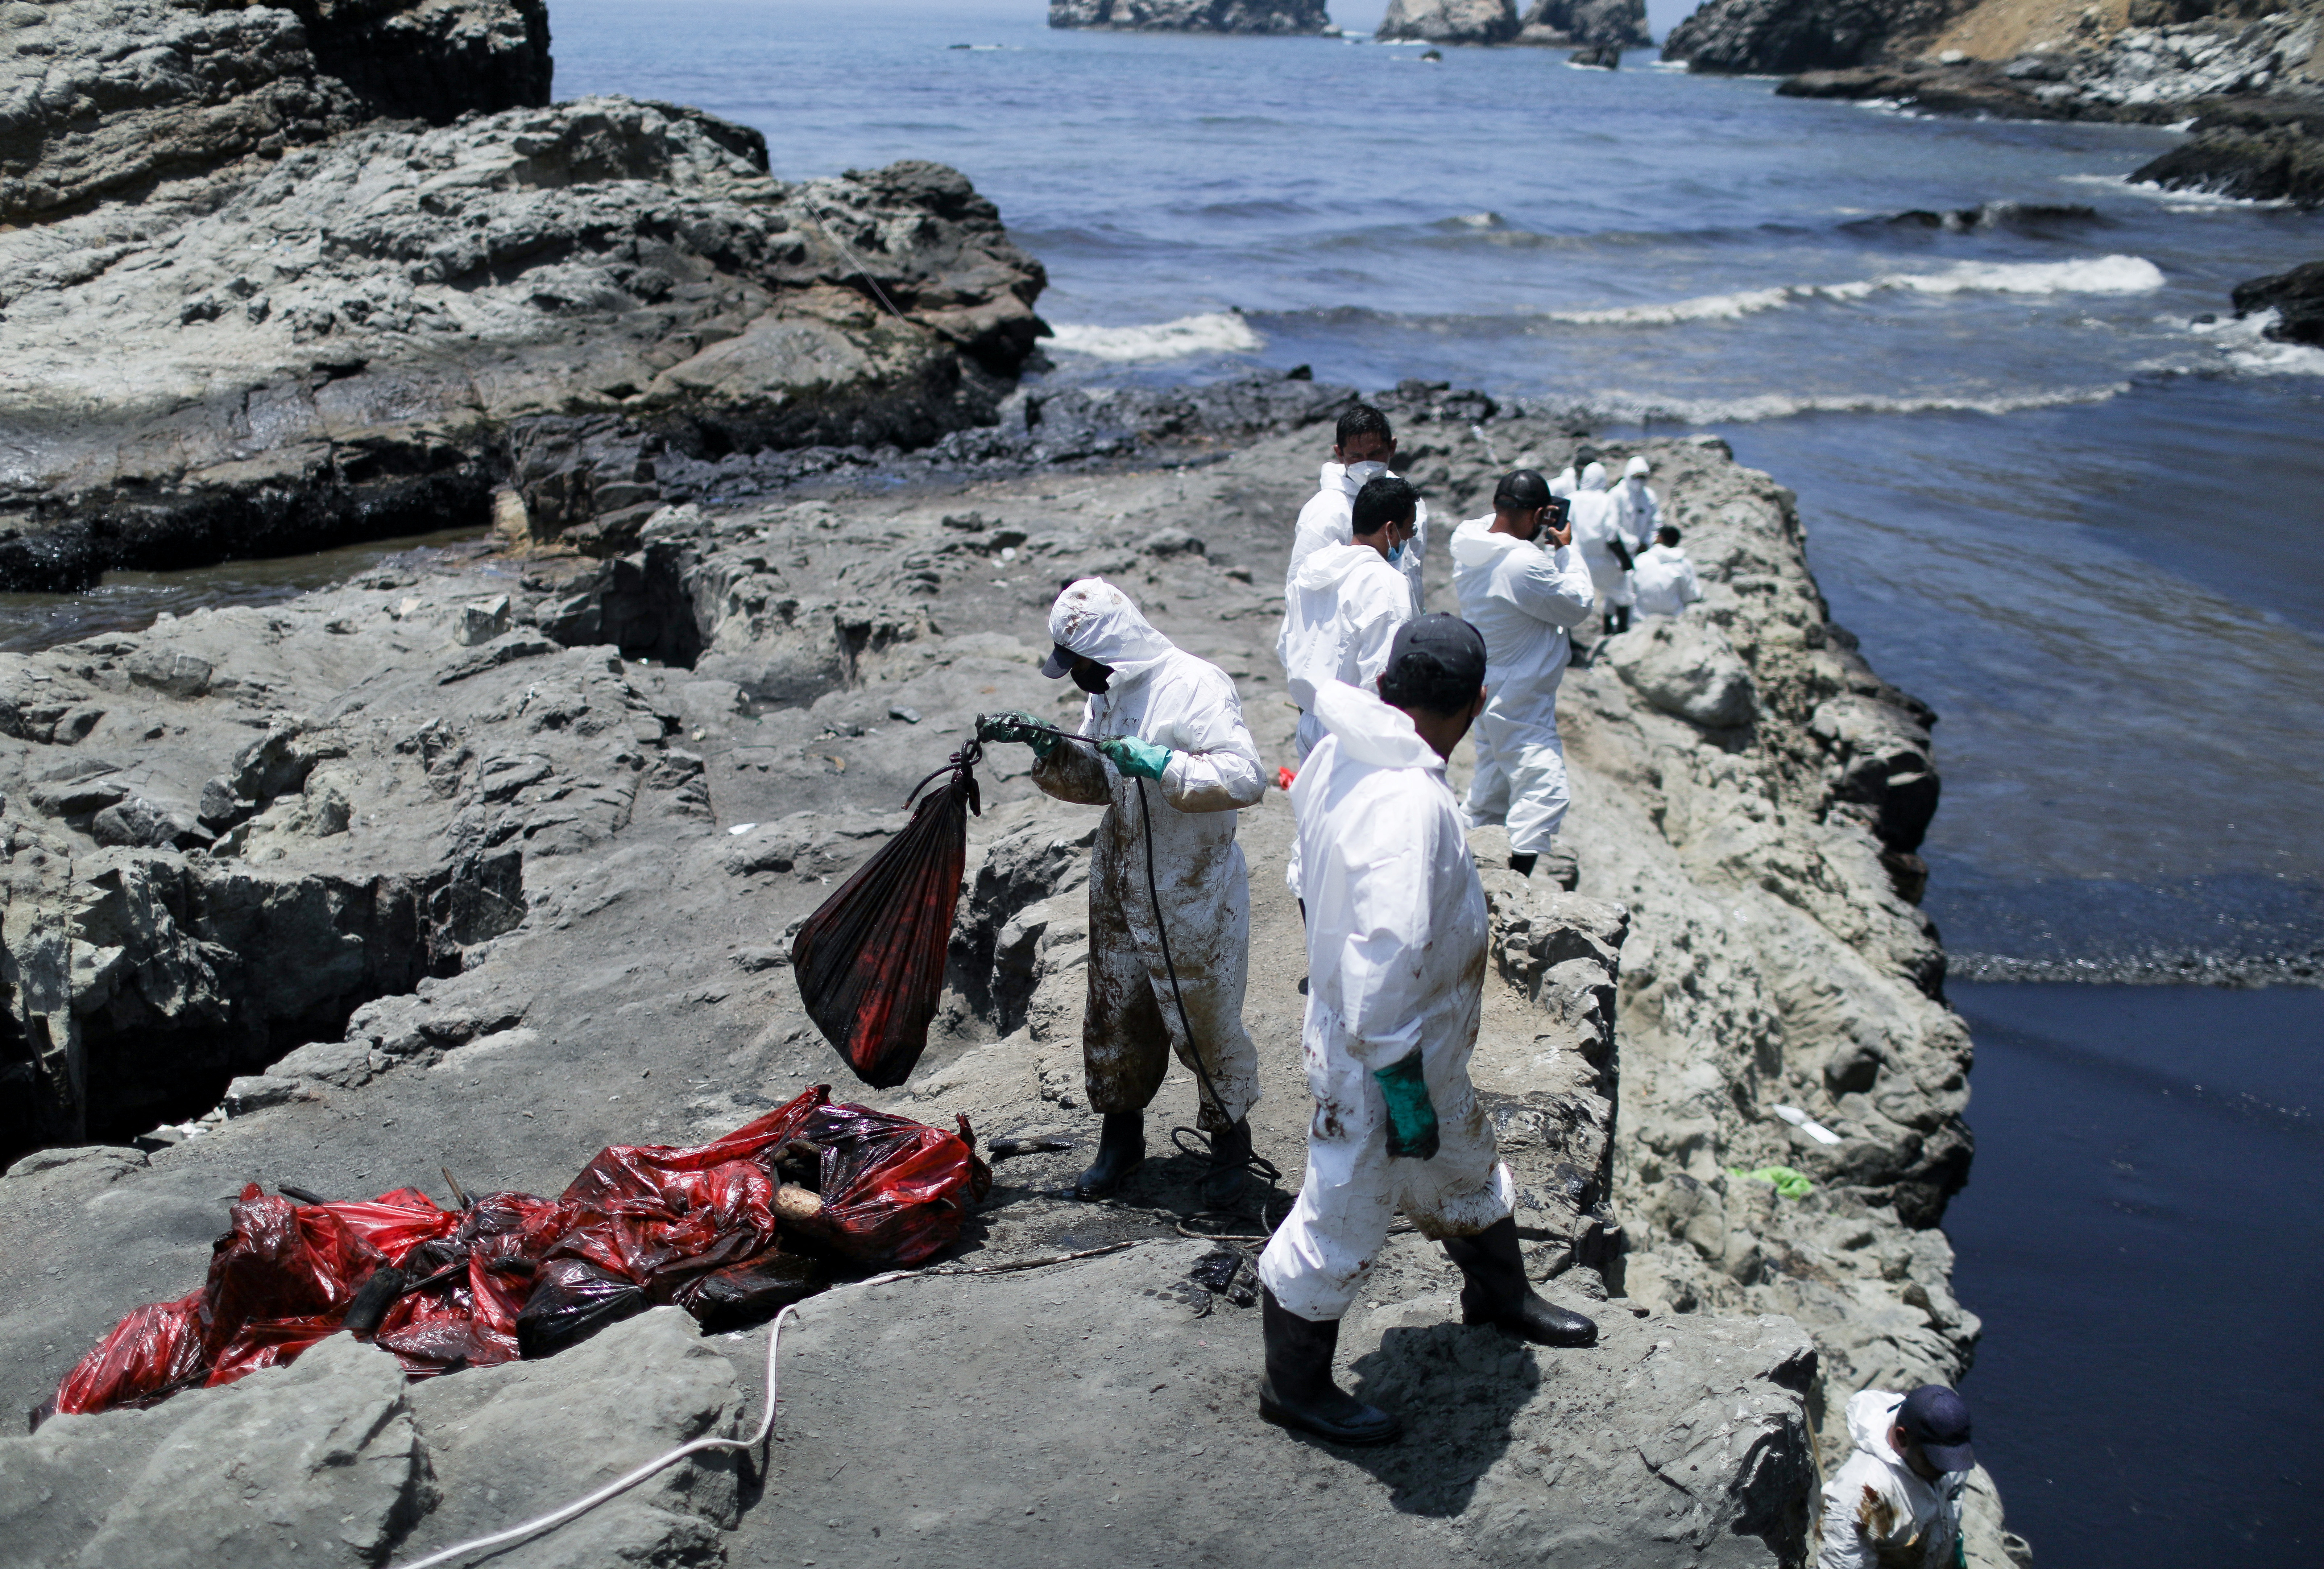 Workers clean up an oil spill caused by abnormal waves, triggered by a massive underwater volcanic eruption half a world away in Tonga, at the Peruvian beach in Ventanilla, Peru, 18 January 2022. REUTERS/Pilar Olivares